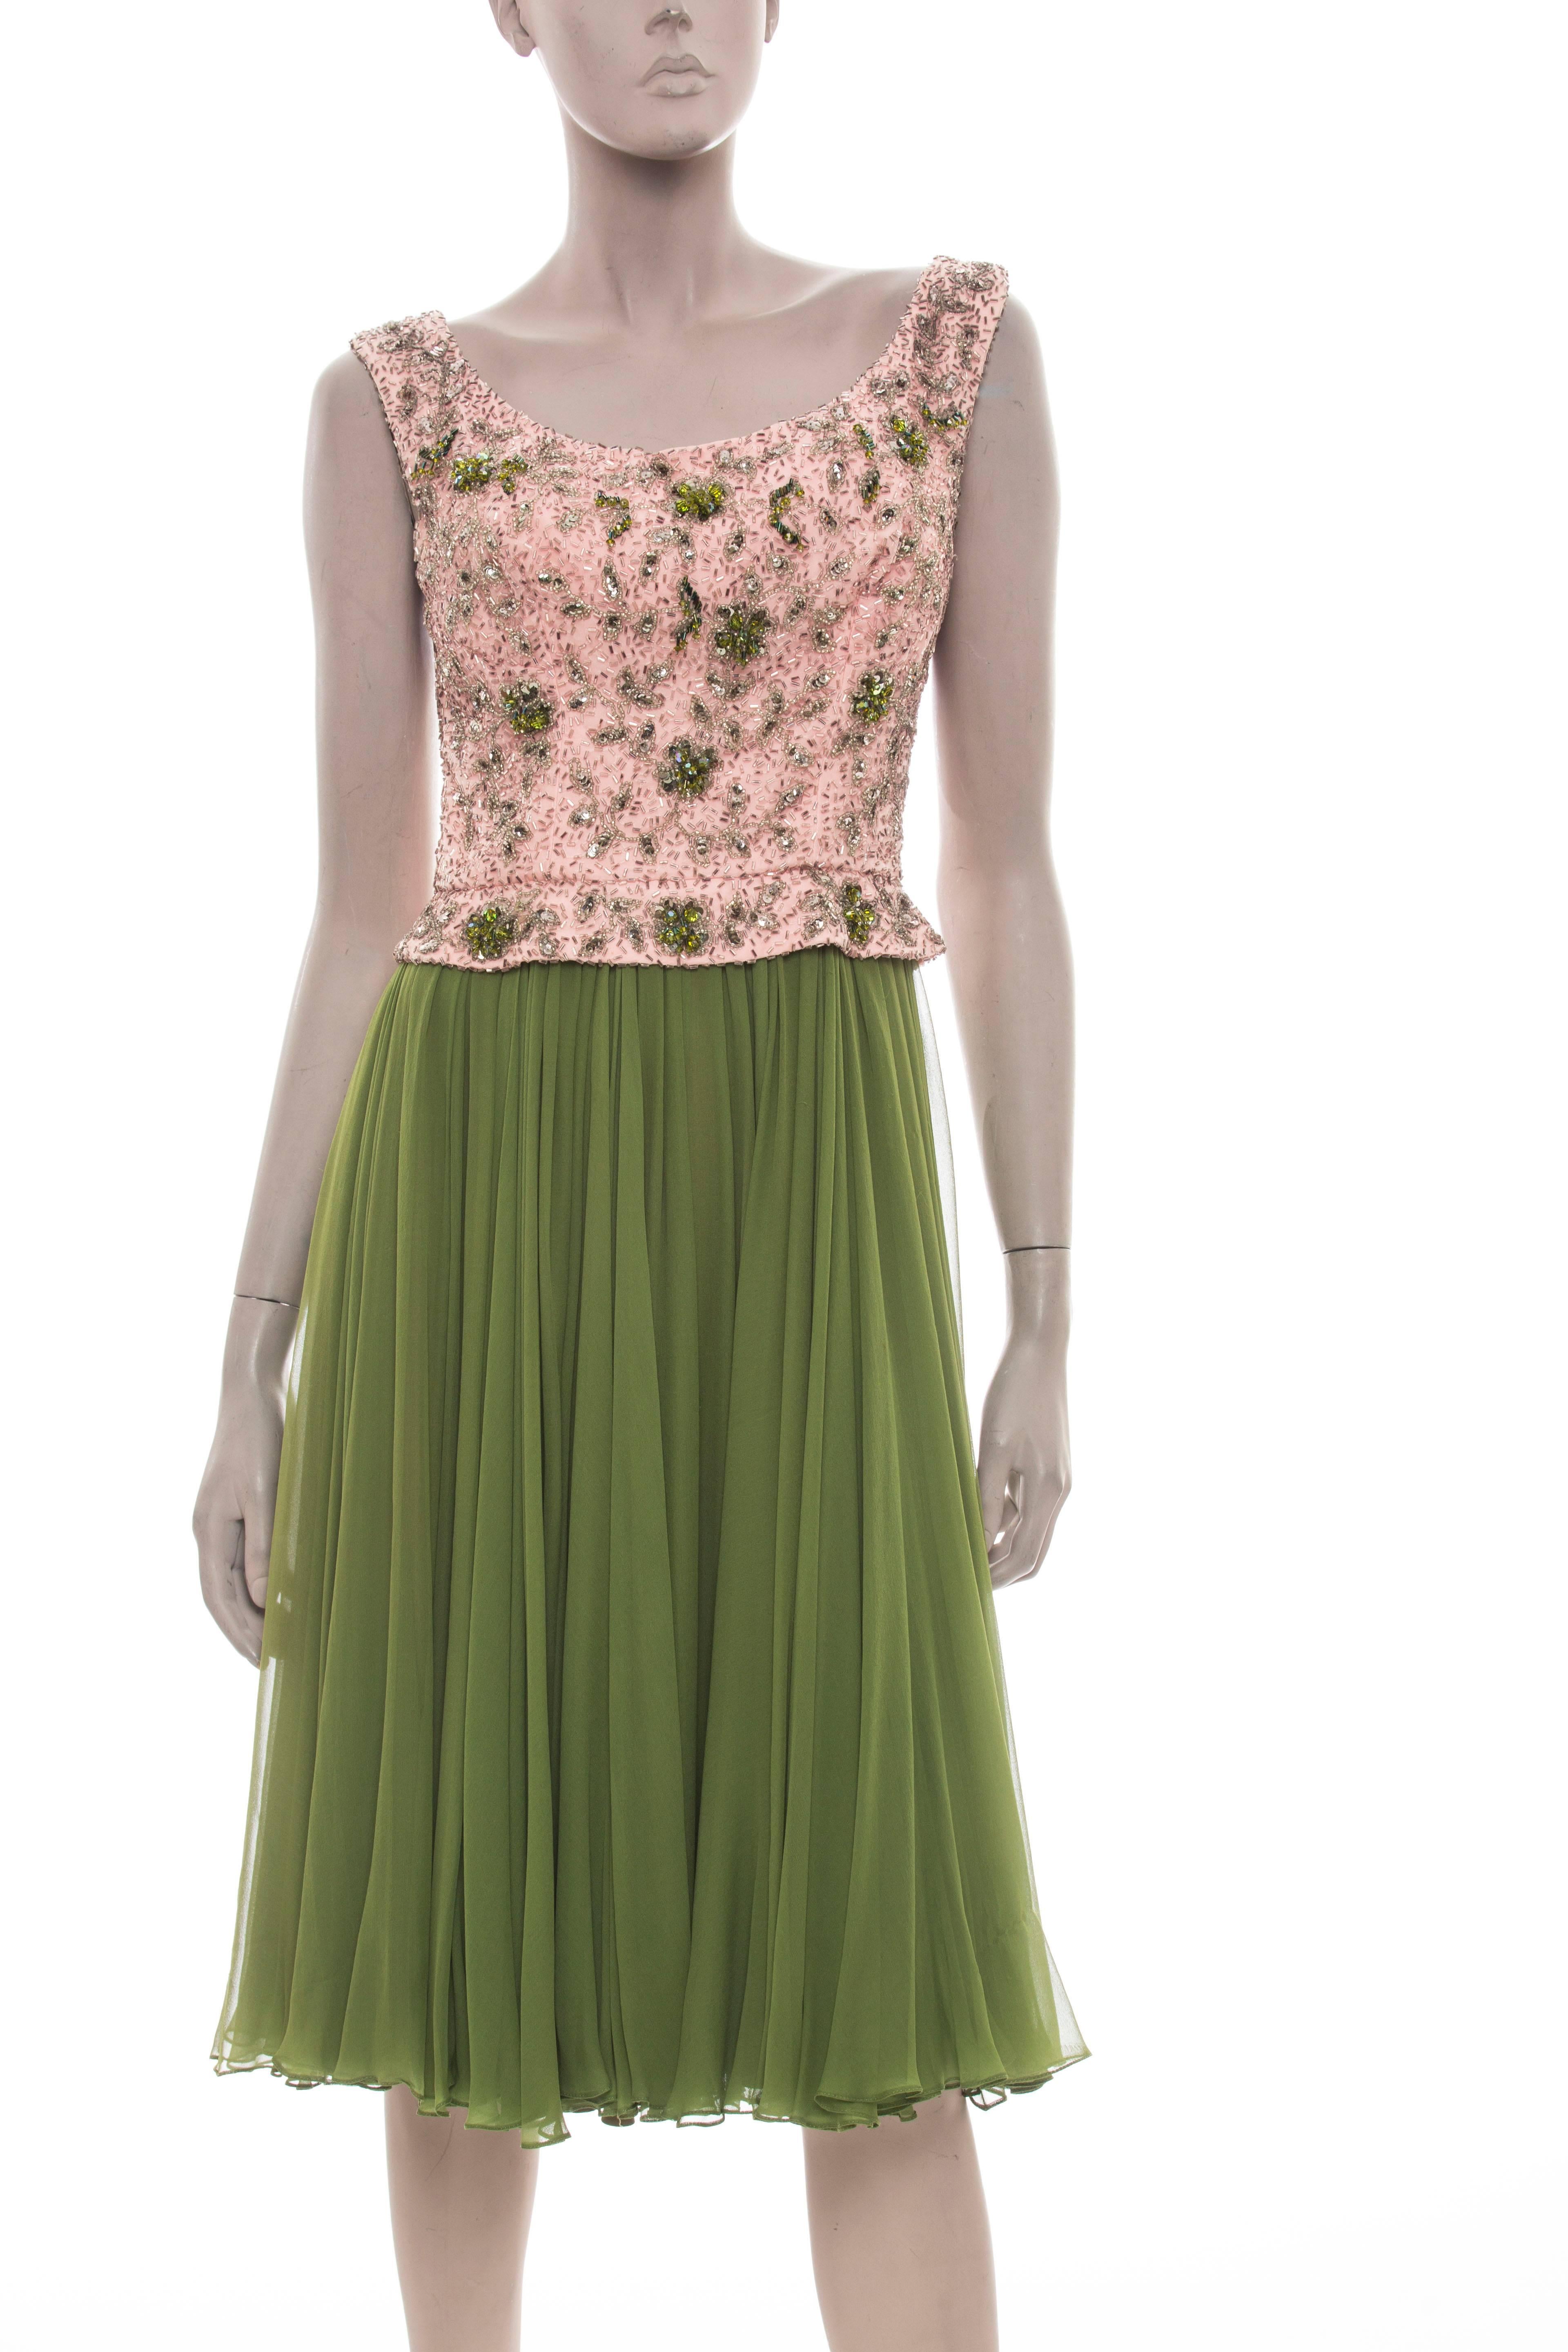 Pat Sandler for Highlight, circa 1960's dress, beaded bodice with pleated silk chiffon skirt, back zip and fully lined.